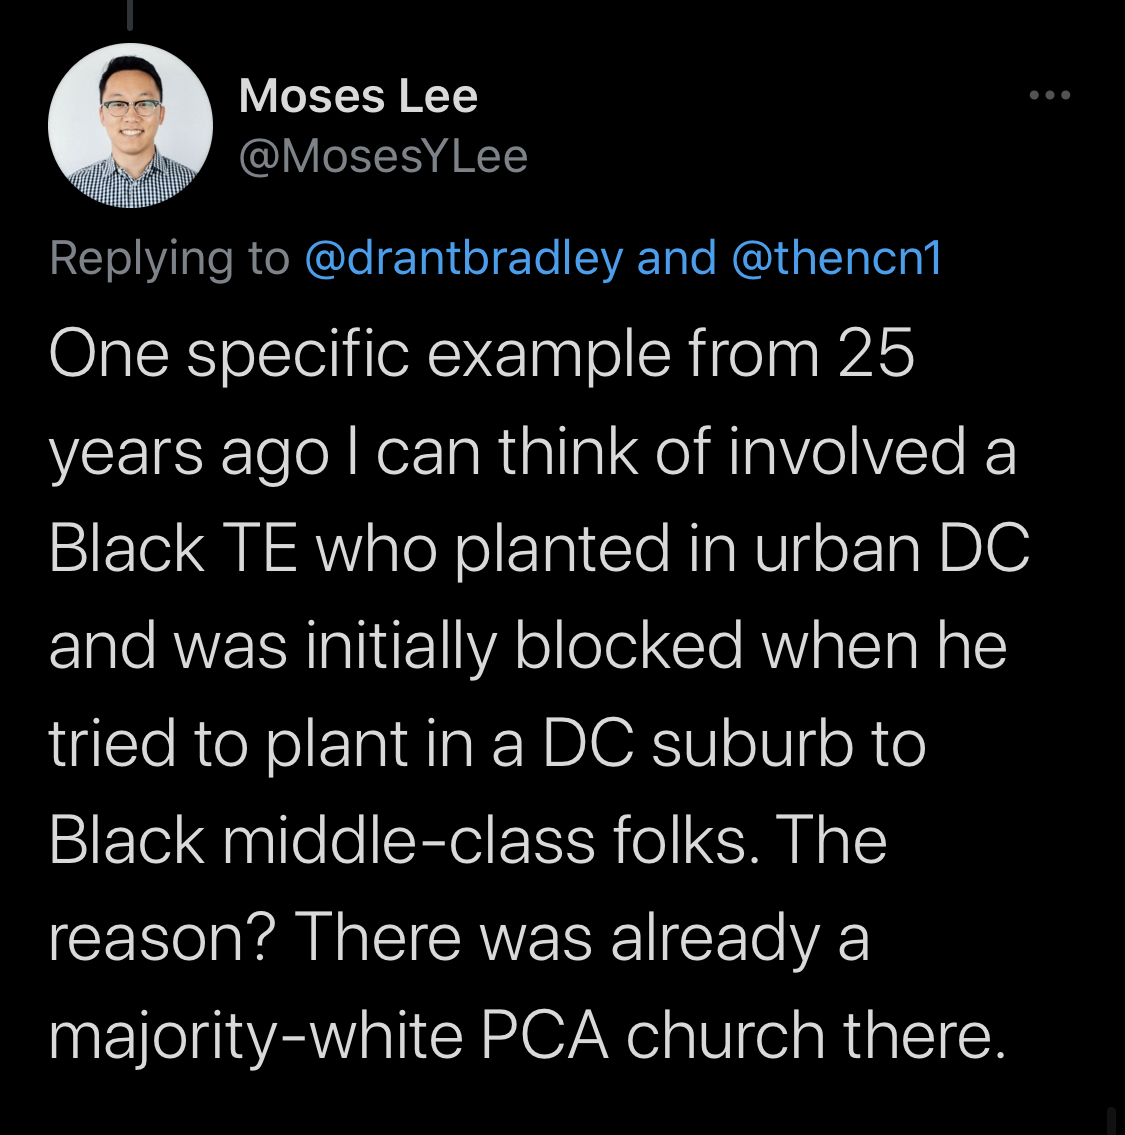 I've seen this pattern for 25 years in cities and states all over the country in Atlanta, St. Louis, Maryland, Virginia, etc. I'm not making this up. I am not lying and just because you haven't heard these stories doesn't mean it didn't happen. Here's one example in the DC area.